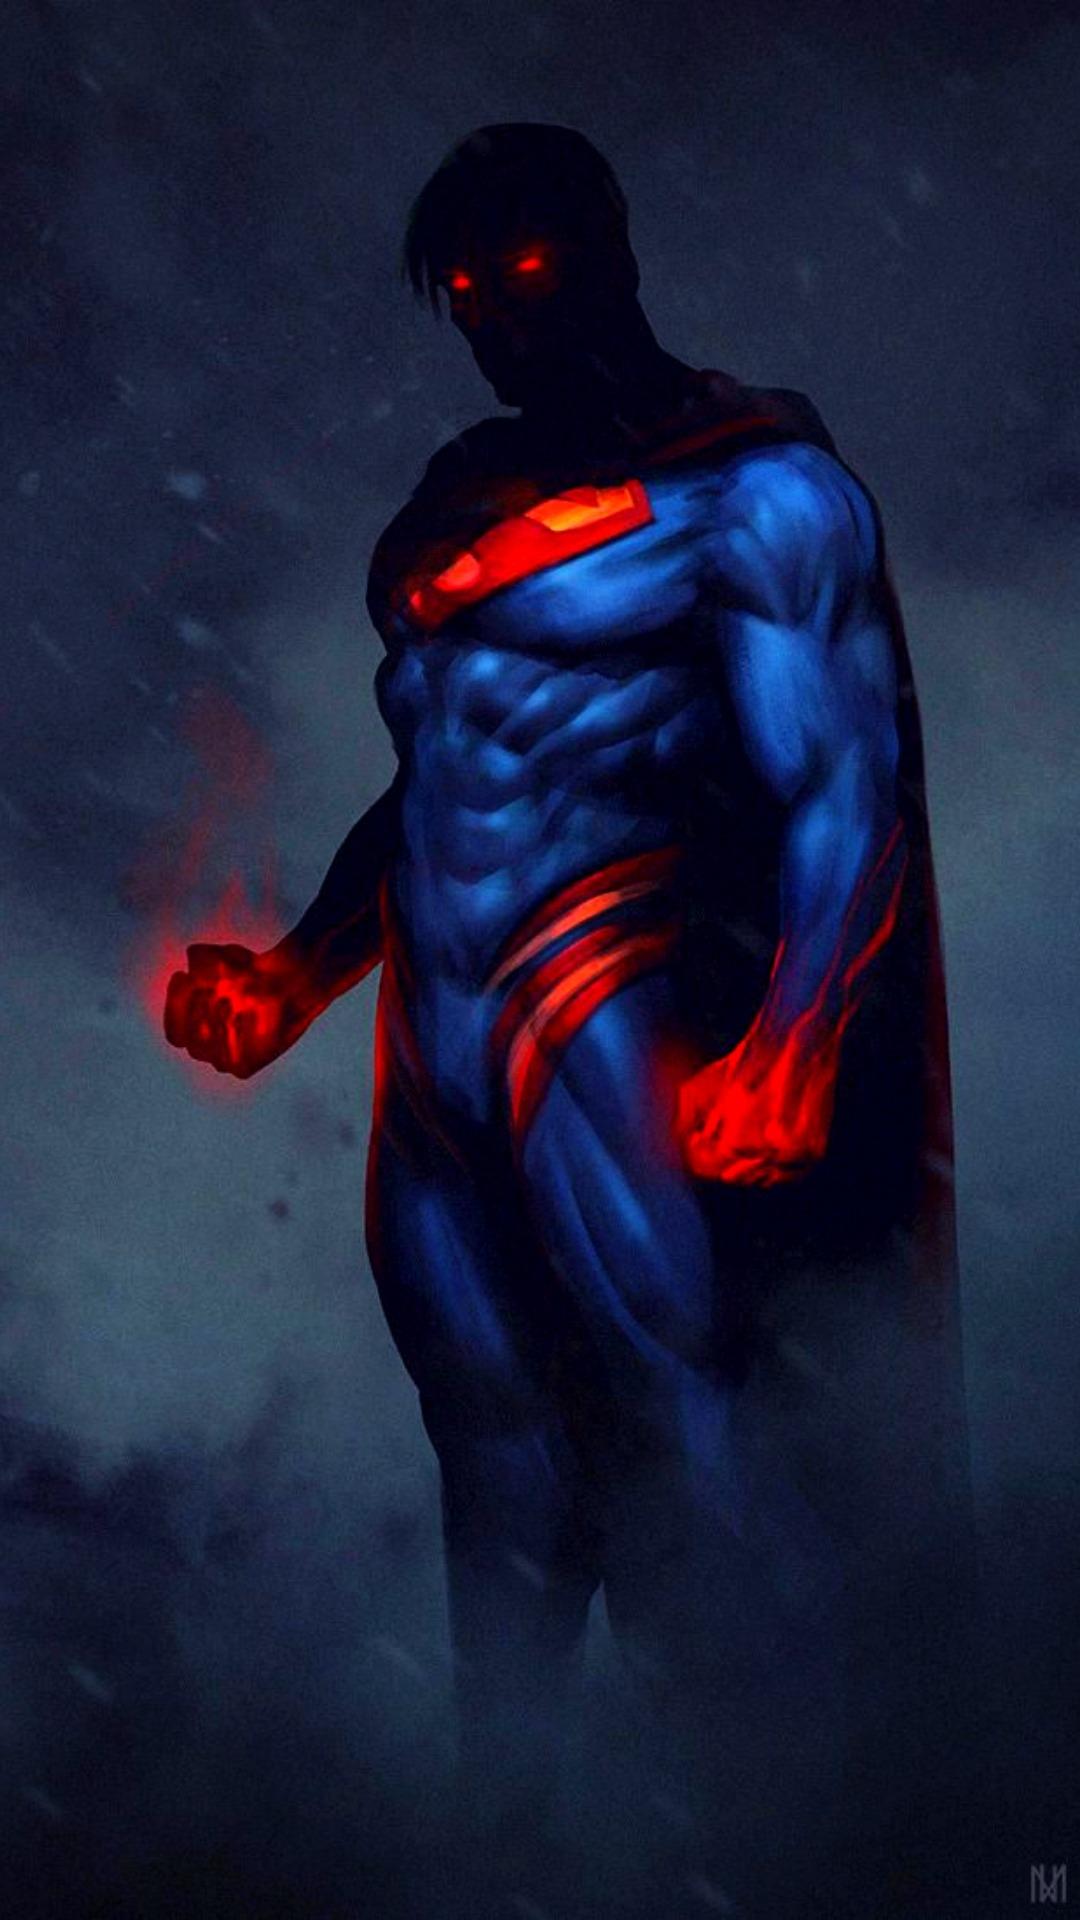 Best Superman HD wallpaper Only for iPhone users